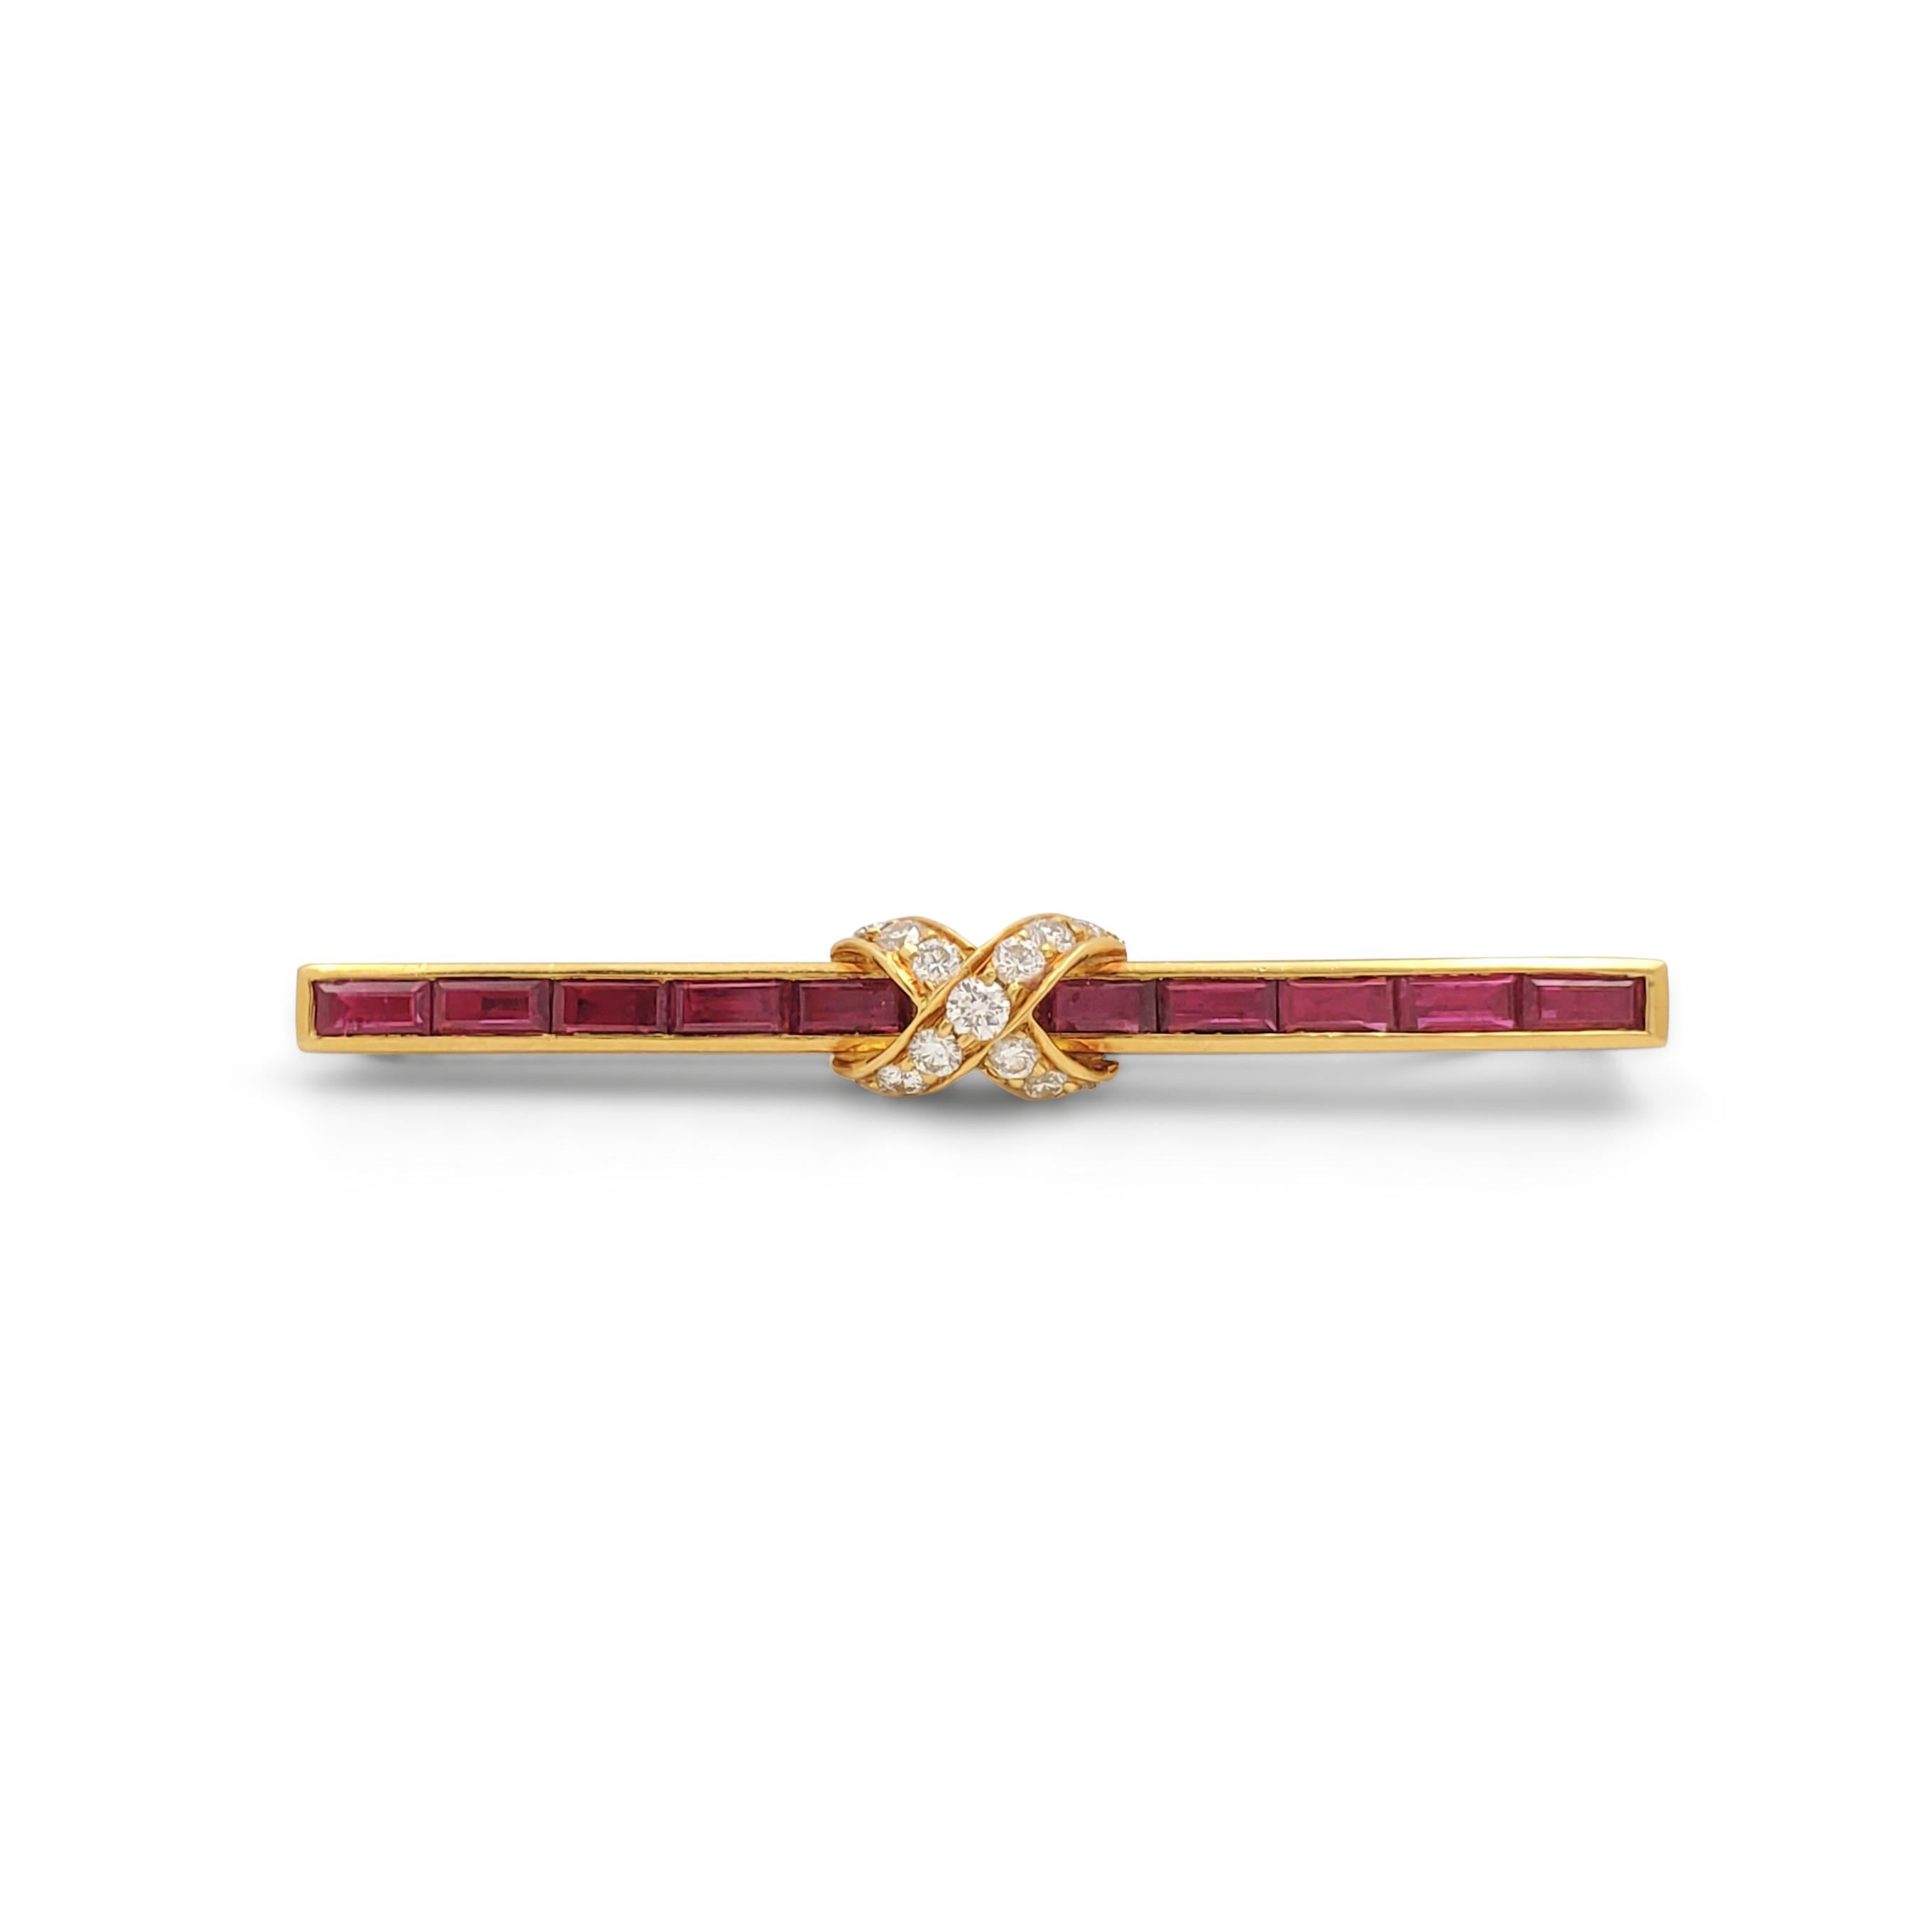 Authentic Tiffany & Co. Tie clip crafted in 18 karat yellow gold with a polished finish set with 11 baguettes shaped rubies weighing approximately 0.23 carats each and 13 round brilliant diamonds weighing an estimated 0.50 carats total. The diamonds